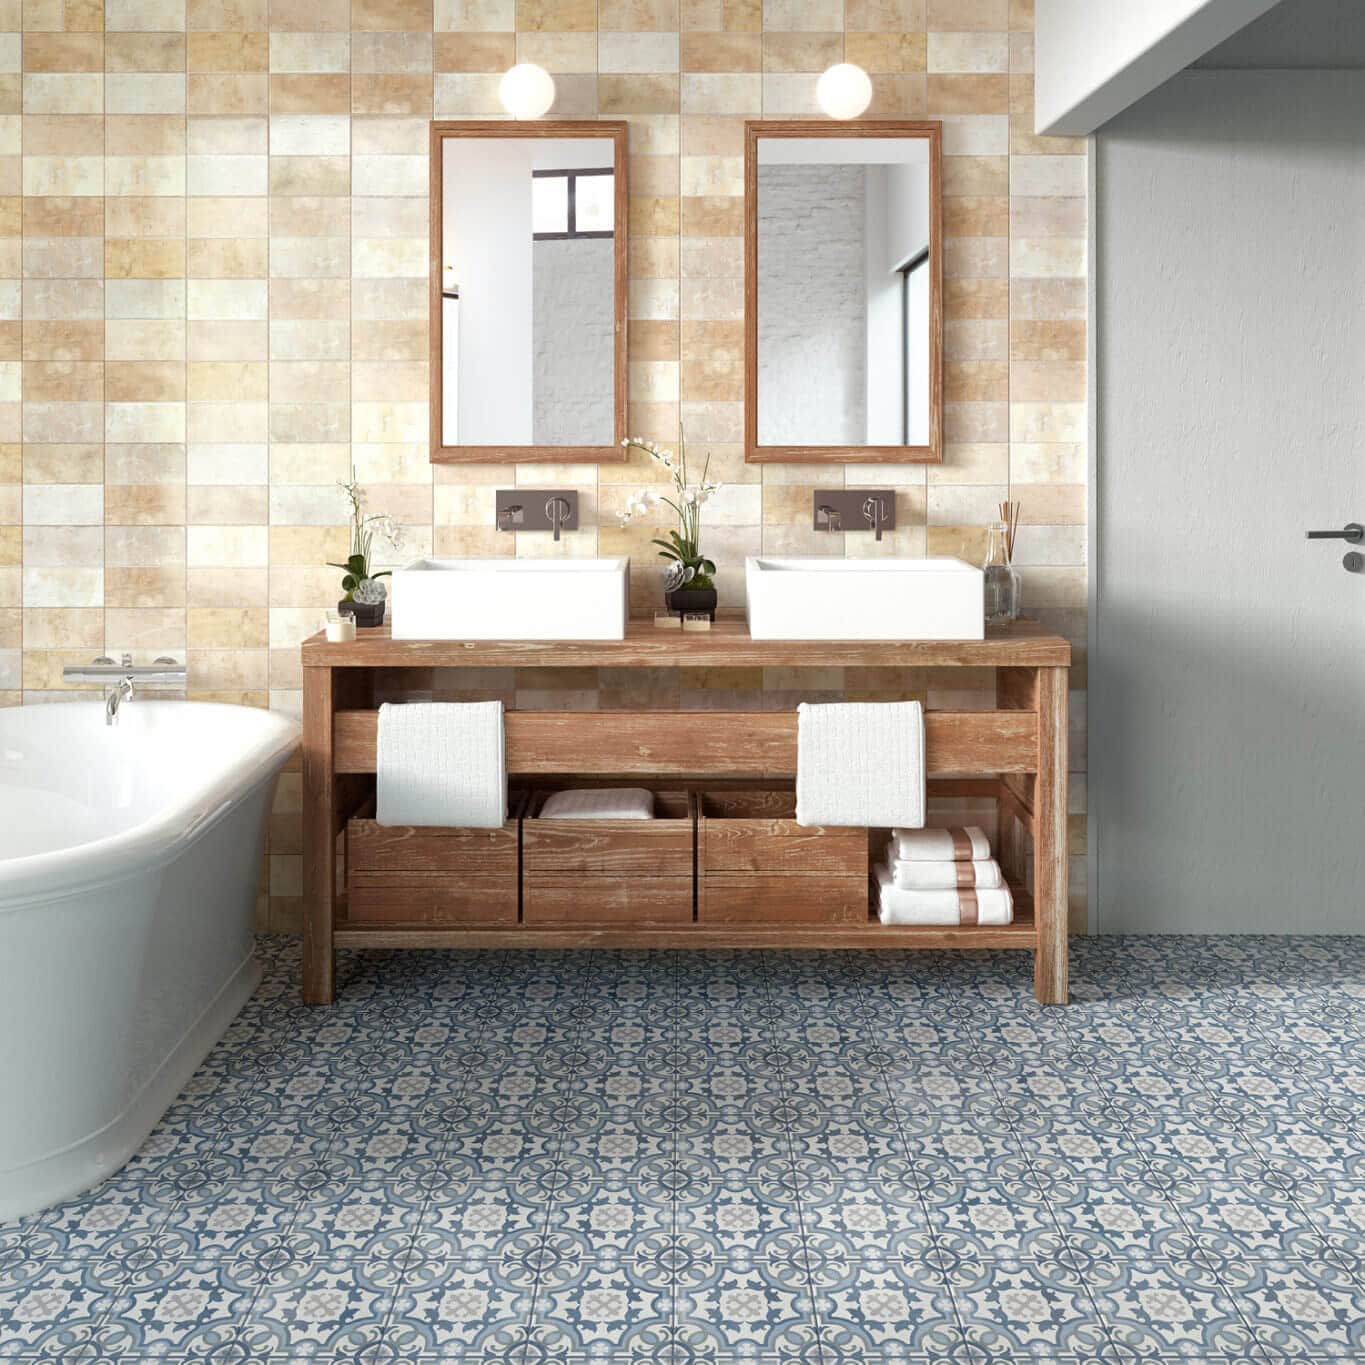 Bathroom with patterned tile flooring